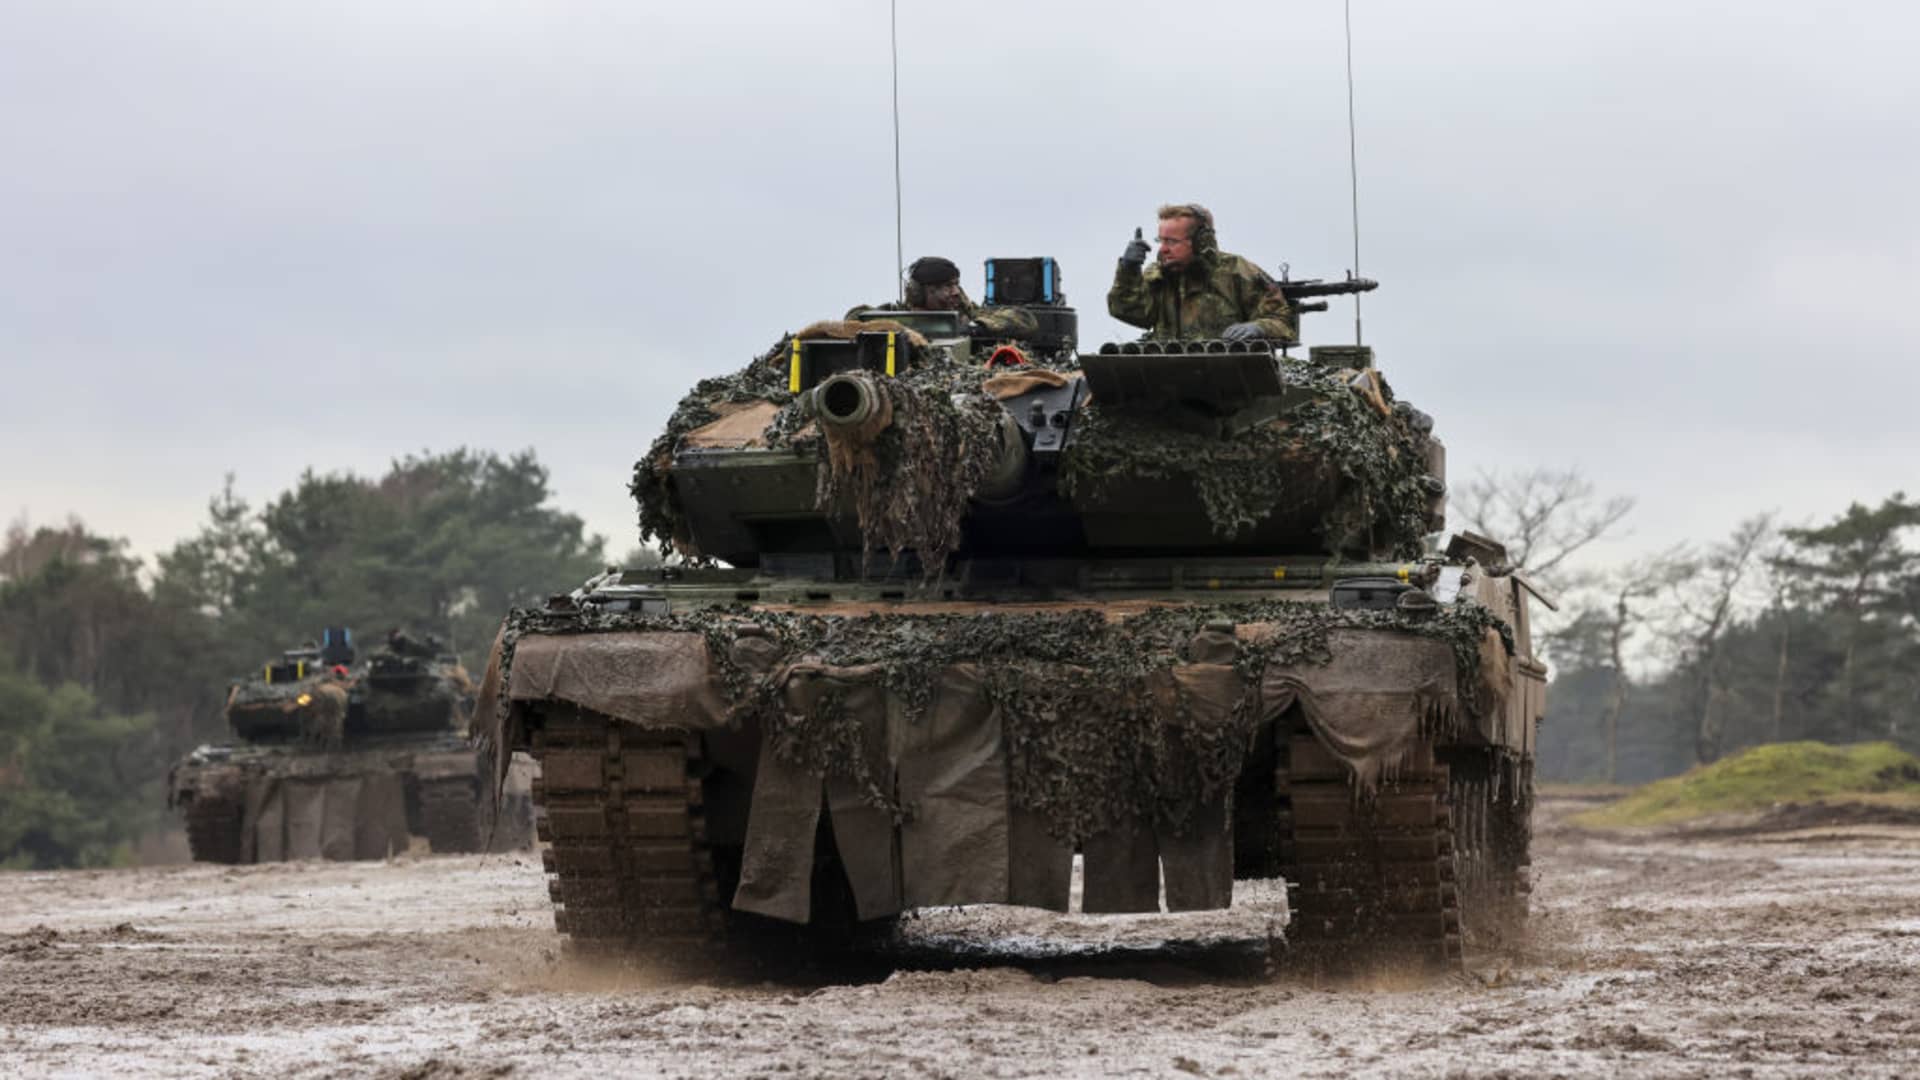 Boris Pistorius, Germany's defense minister, rides in an Leopard 2 A6 battle tank during a presentation by the German Army Panzer Battalion 203 in Augustdorf, Germany, on Wednesday, Feb. 1, 2023.